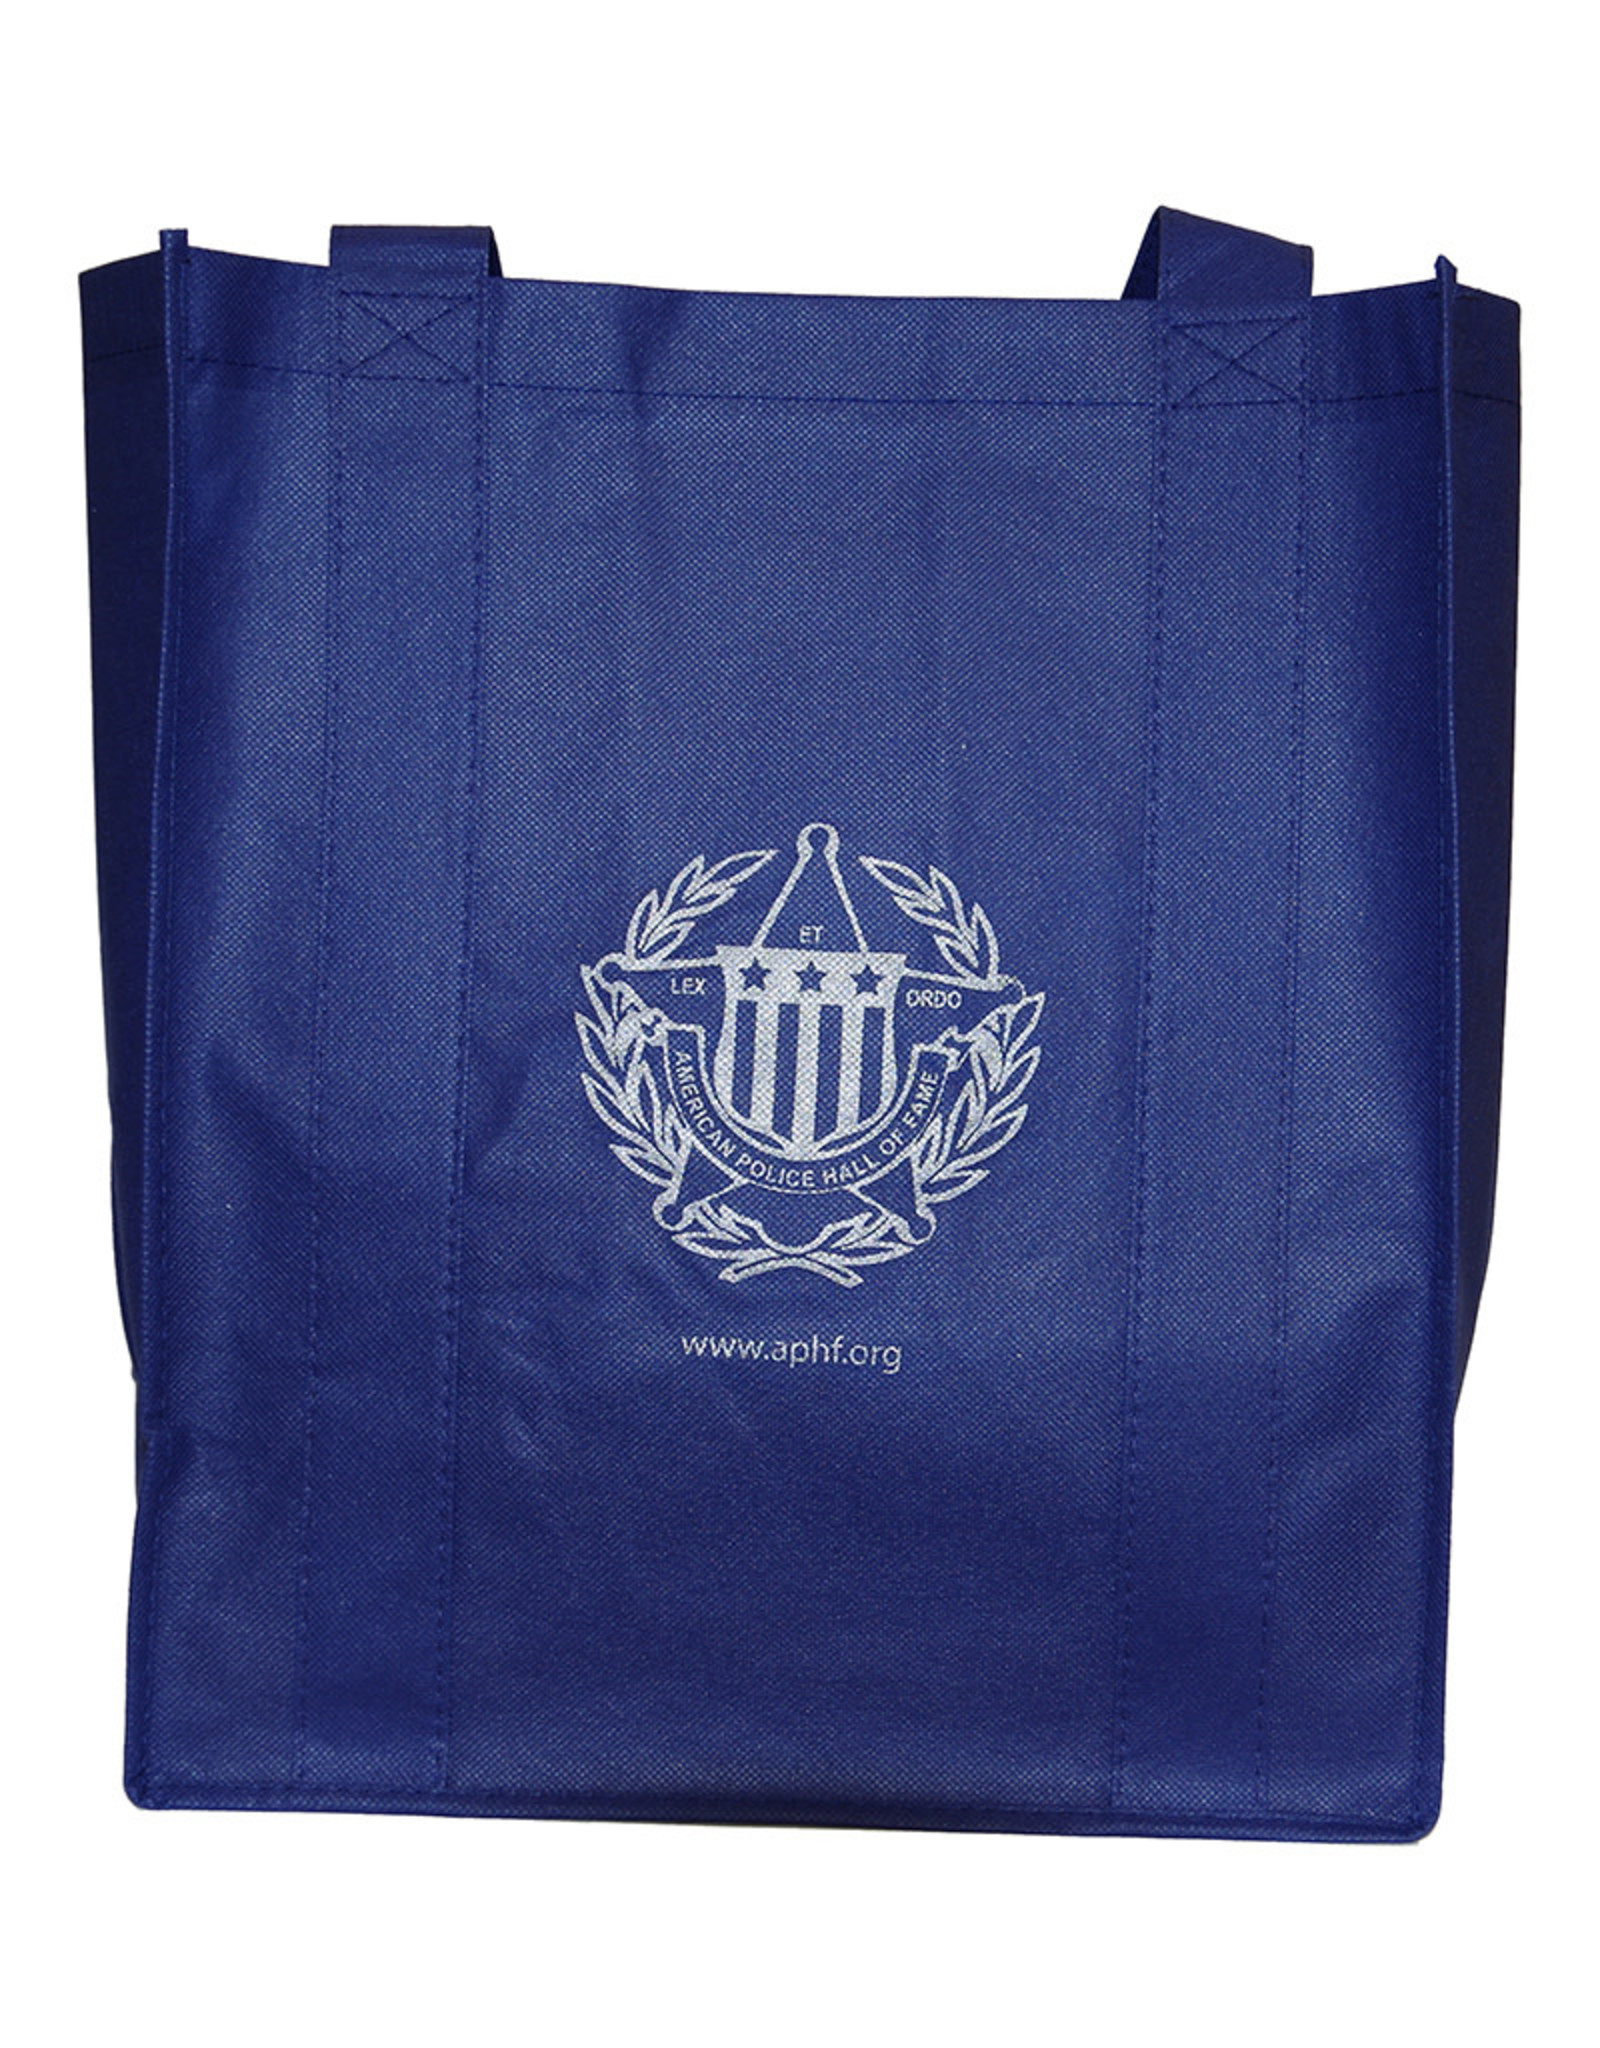 Large Shopping Tote